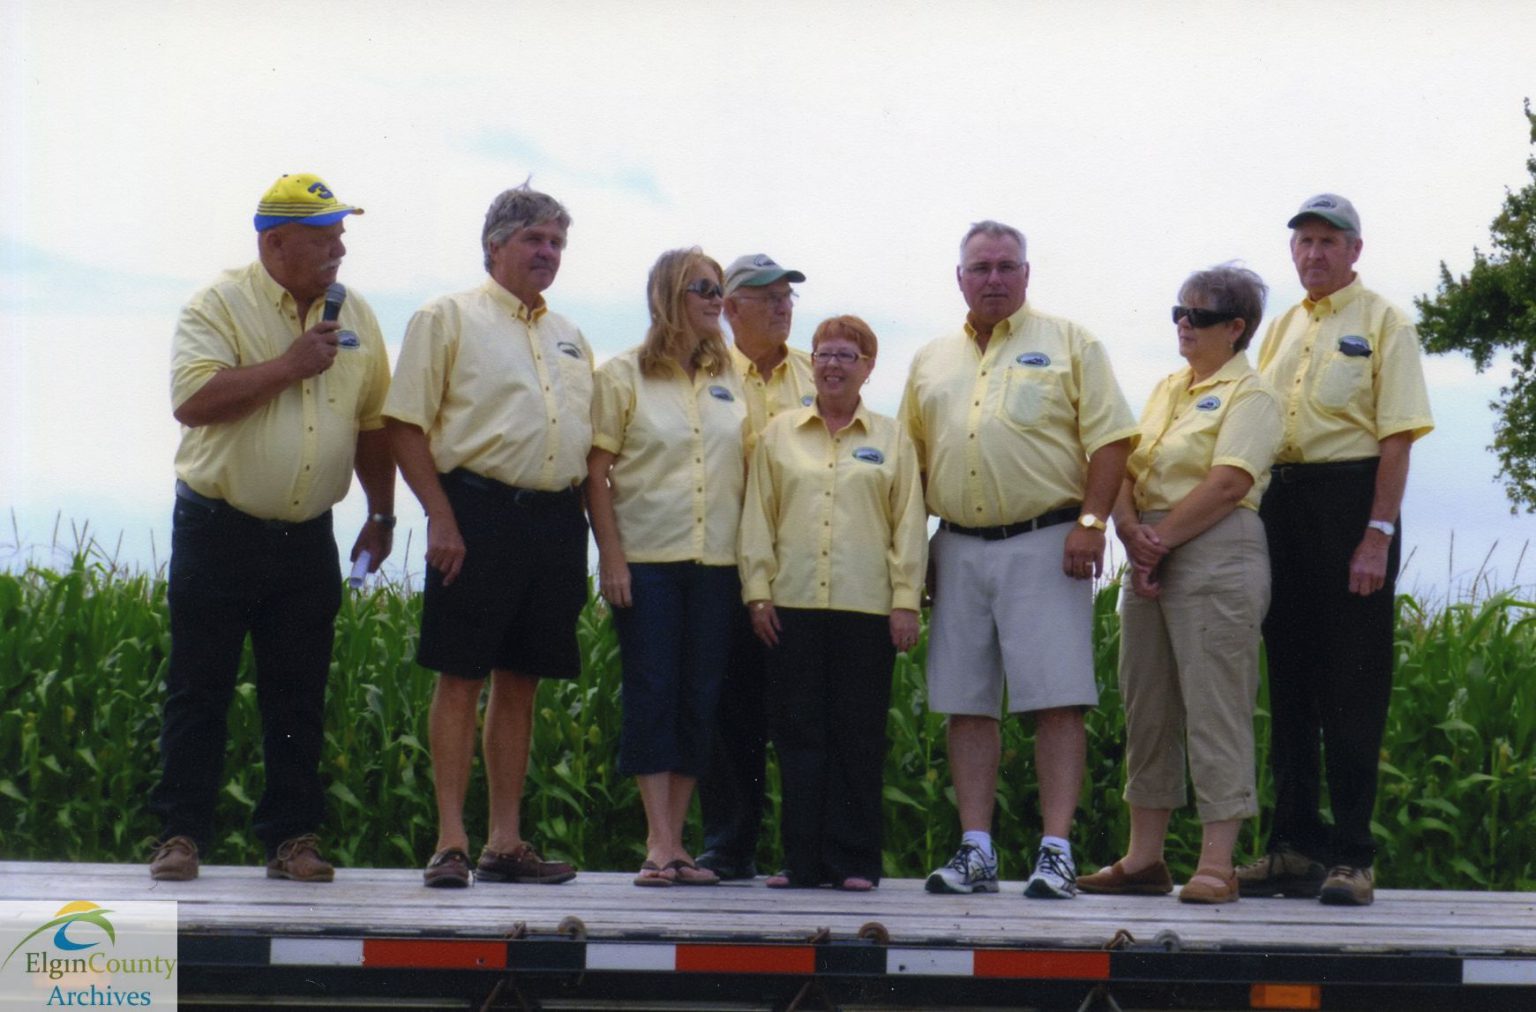 Elgin County Accepting Applications for the International Plowing Match